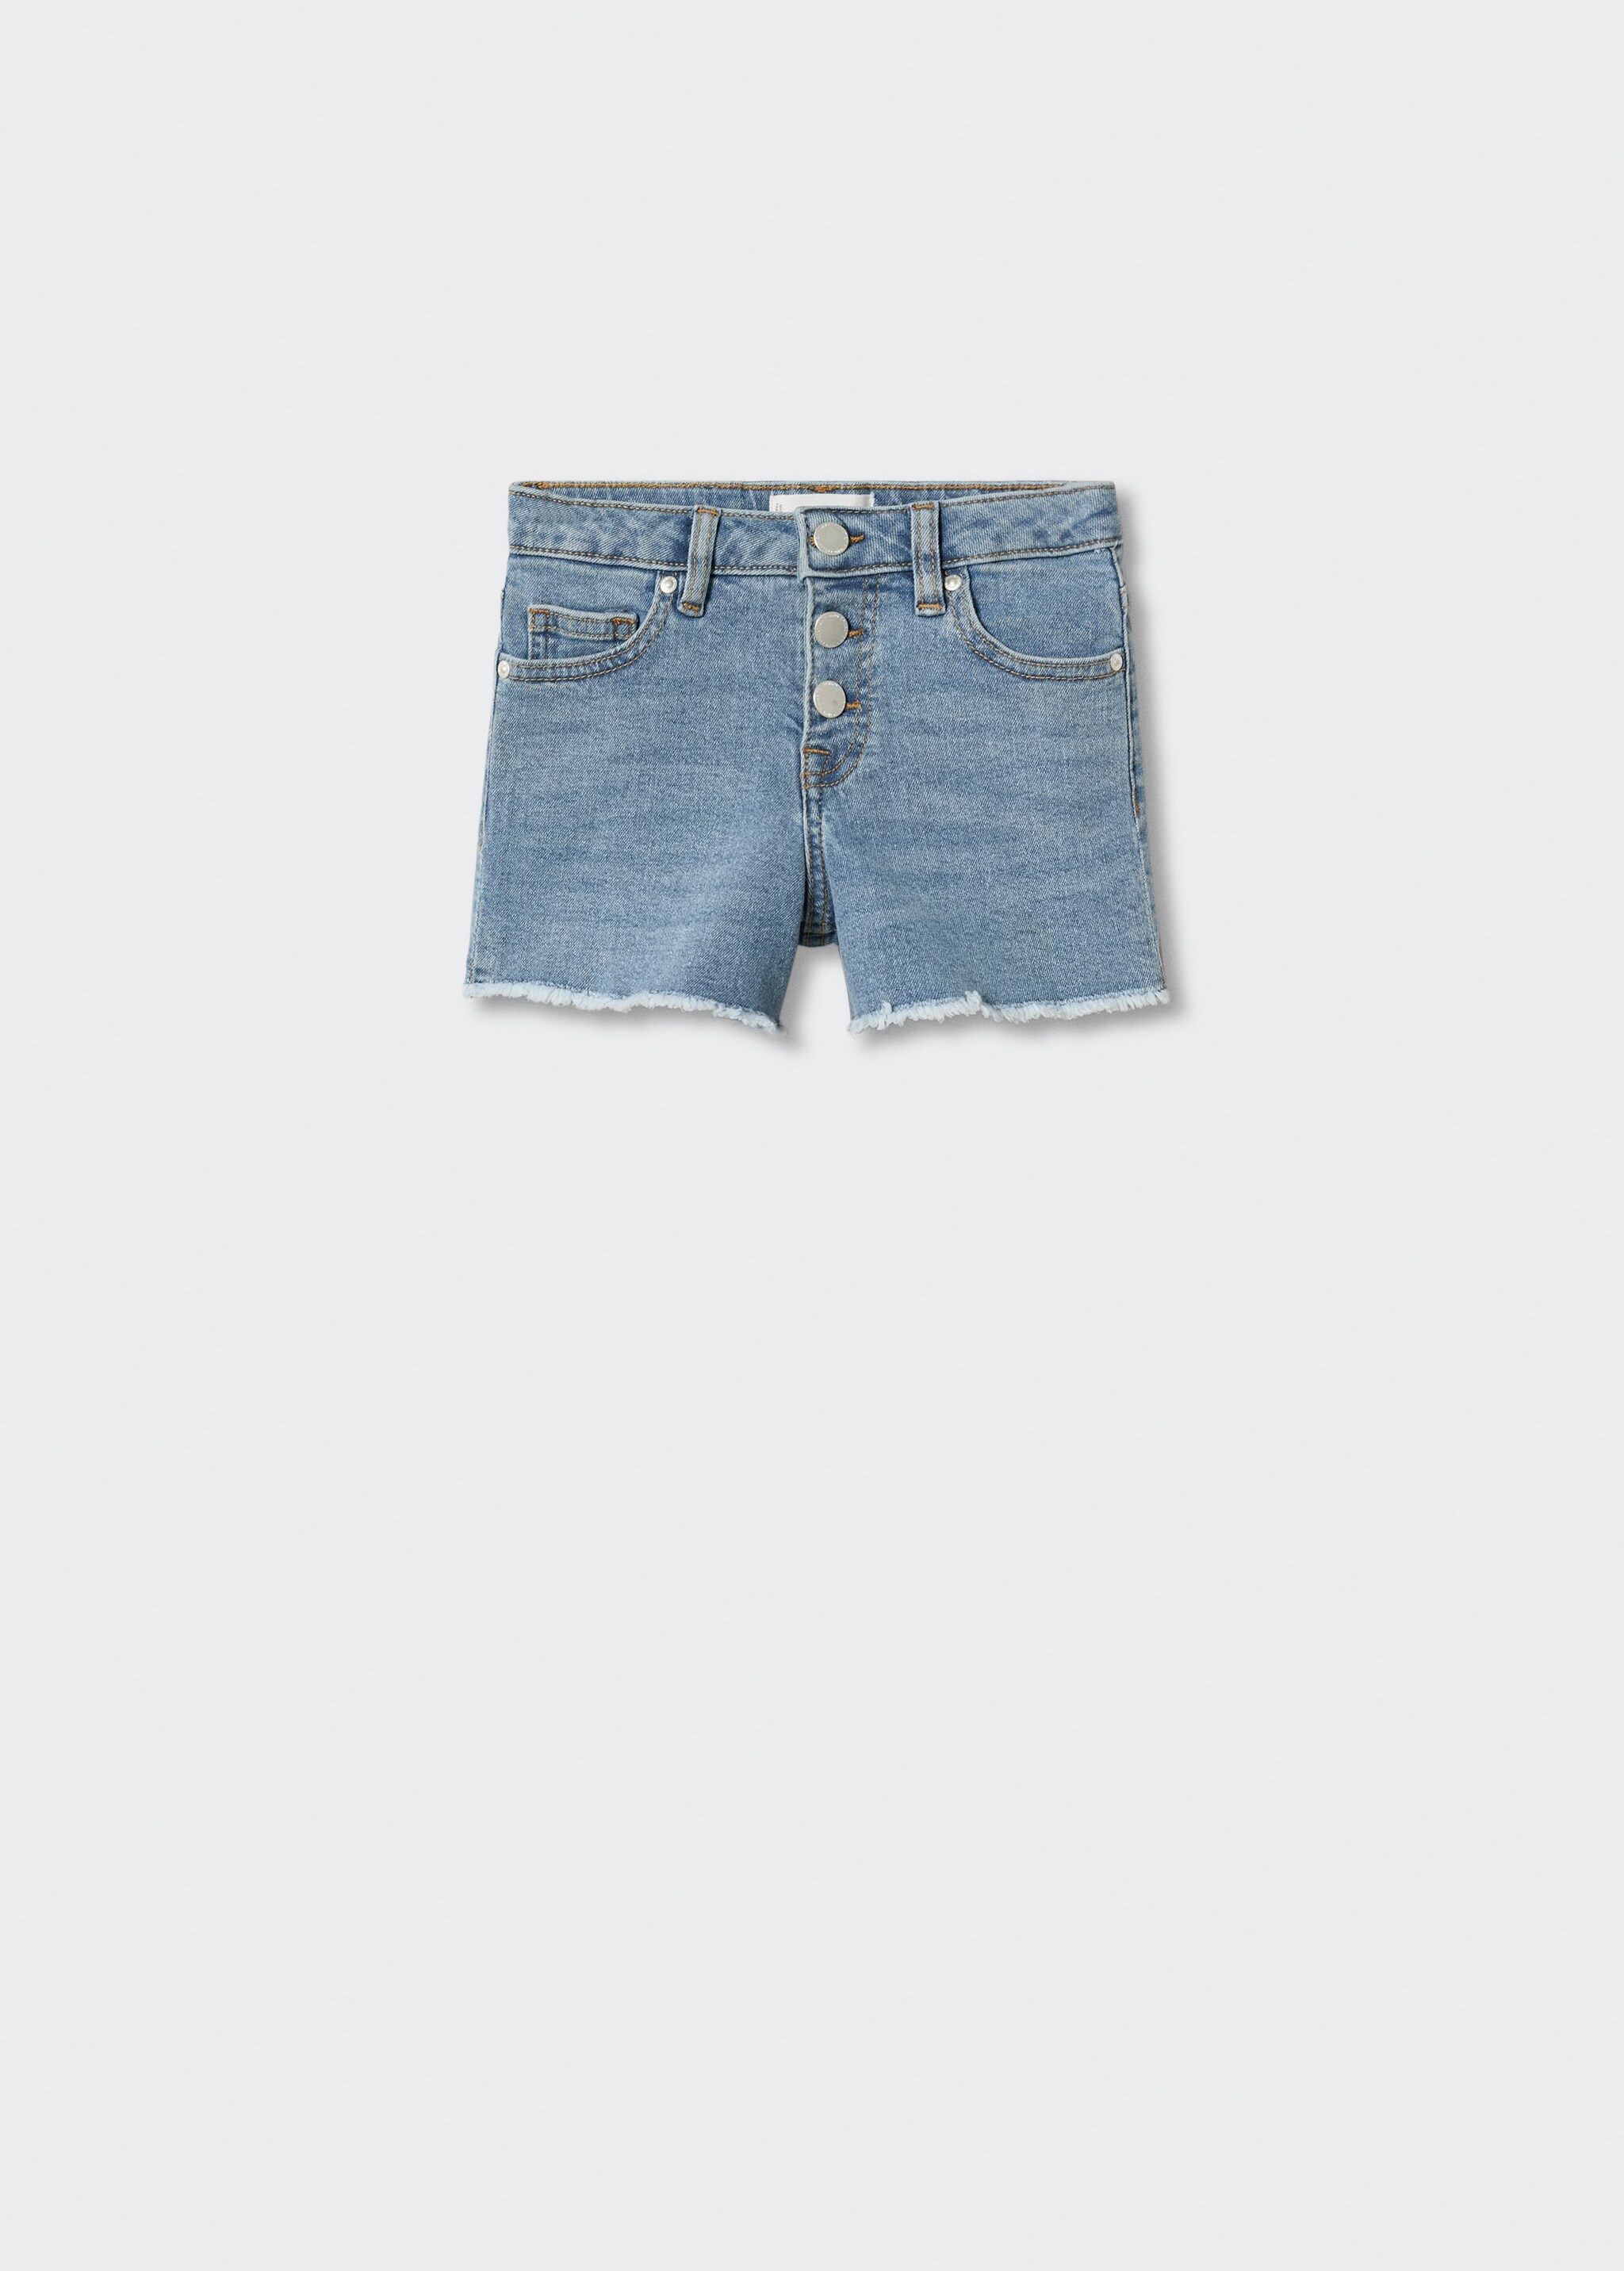 Denim shorts  - Article without model